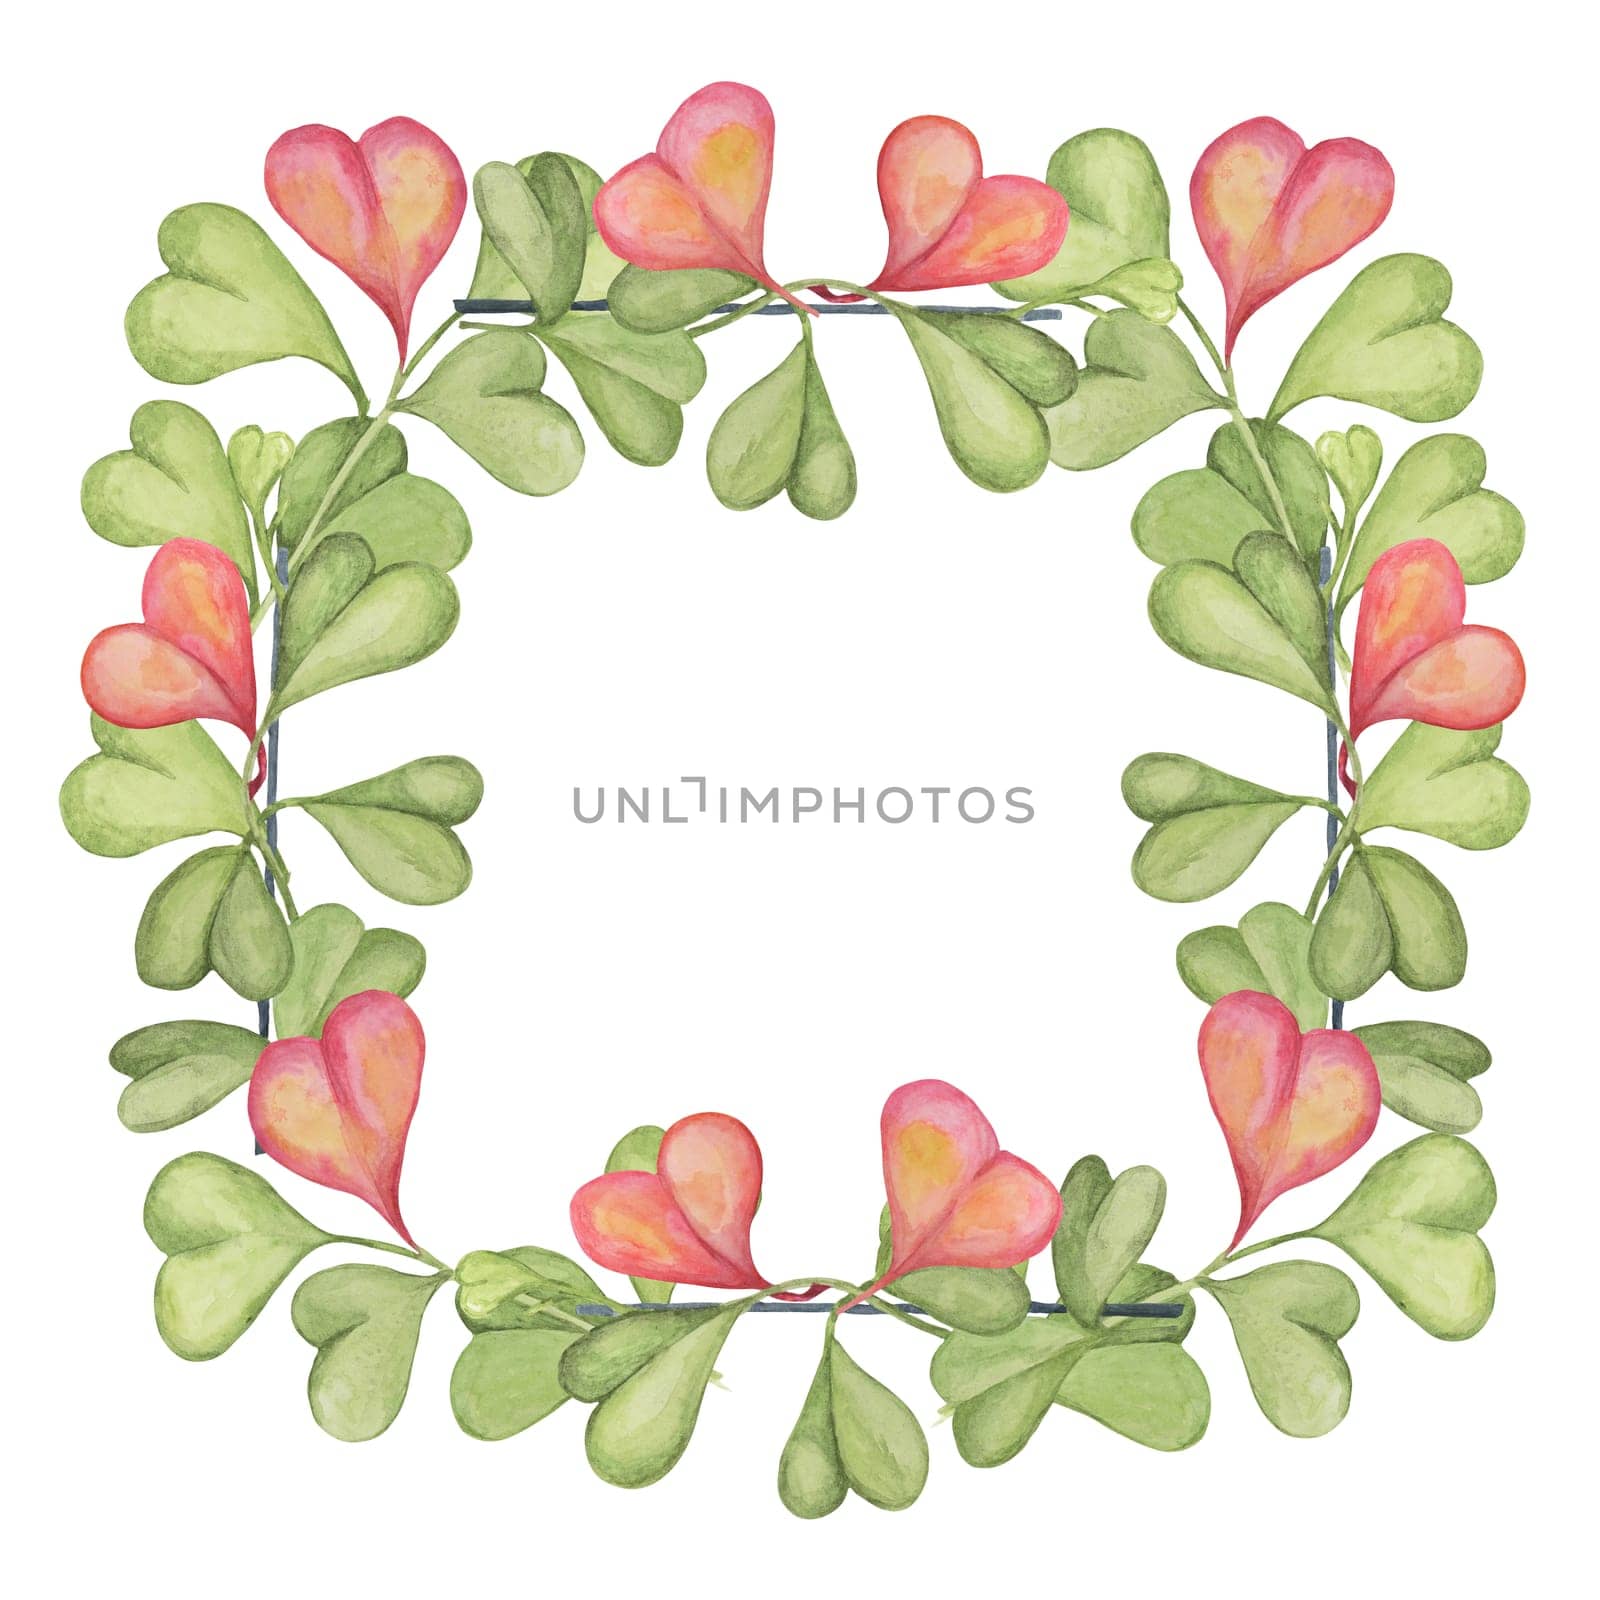 Square frame with gentle sweetheart hoya, hoya kerrii plant in pink and green, isolated hand drawn watercolor. Clipart for Mothers, Fathers day design for printing, cards, gift wrapping, textile